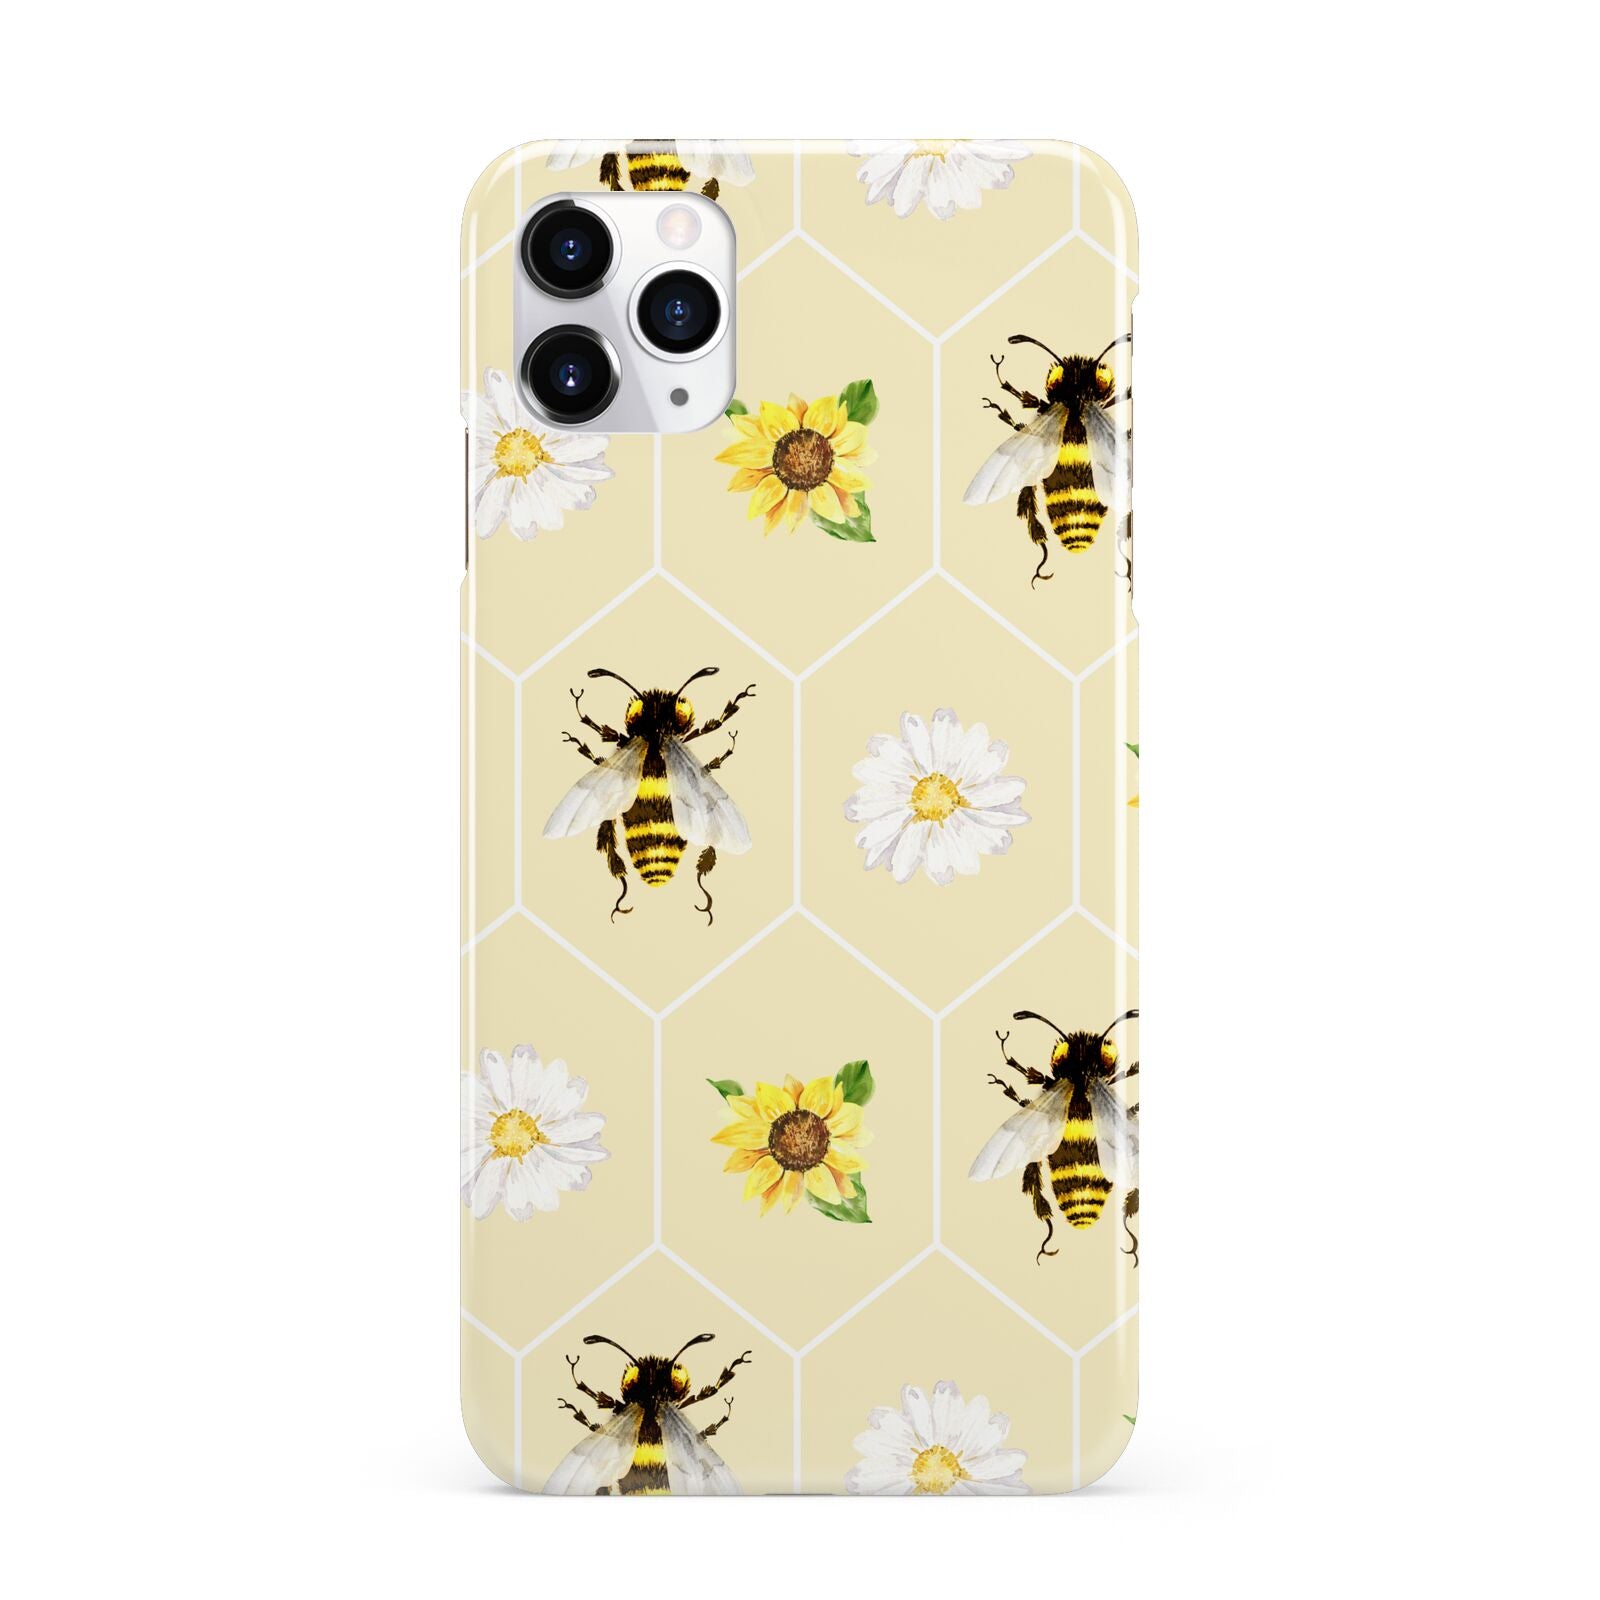 Daisies Bees and Sunflowers iPhone 11 Pro Max 3D Snap Case